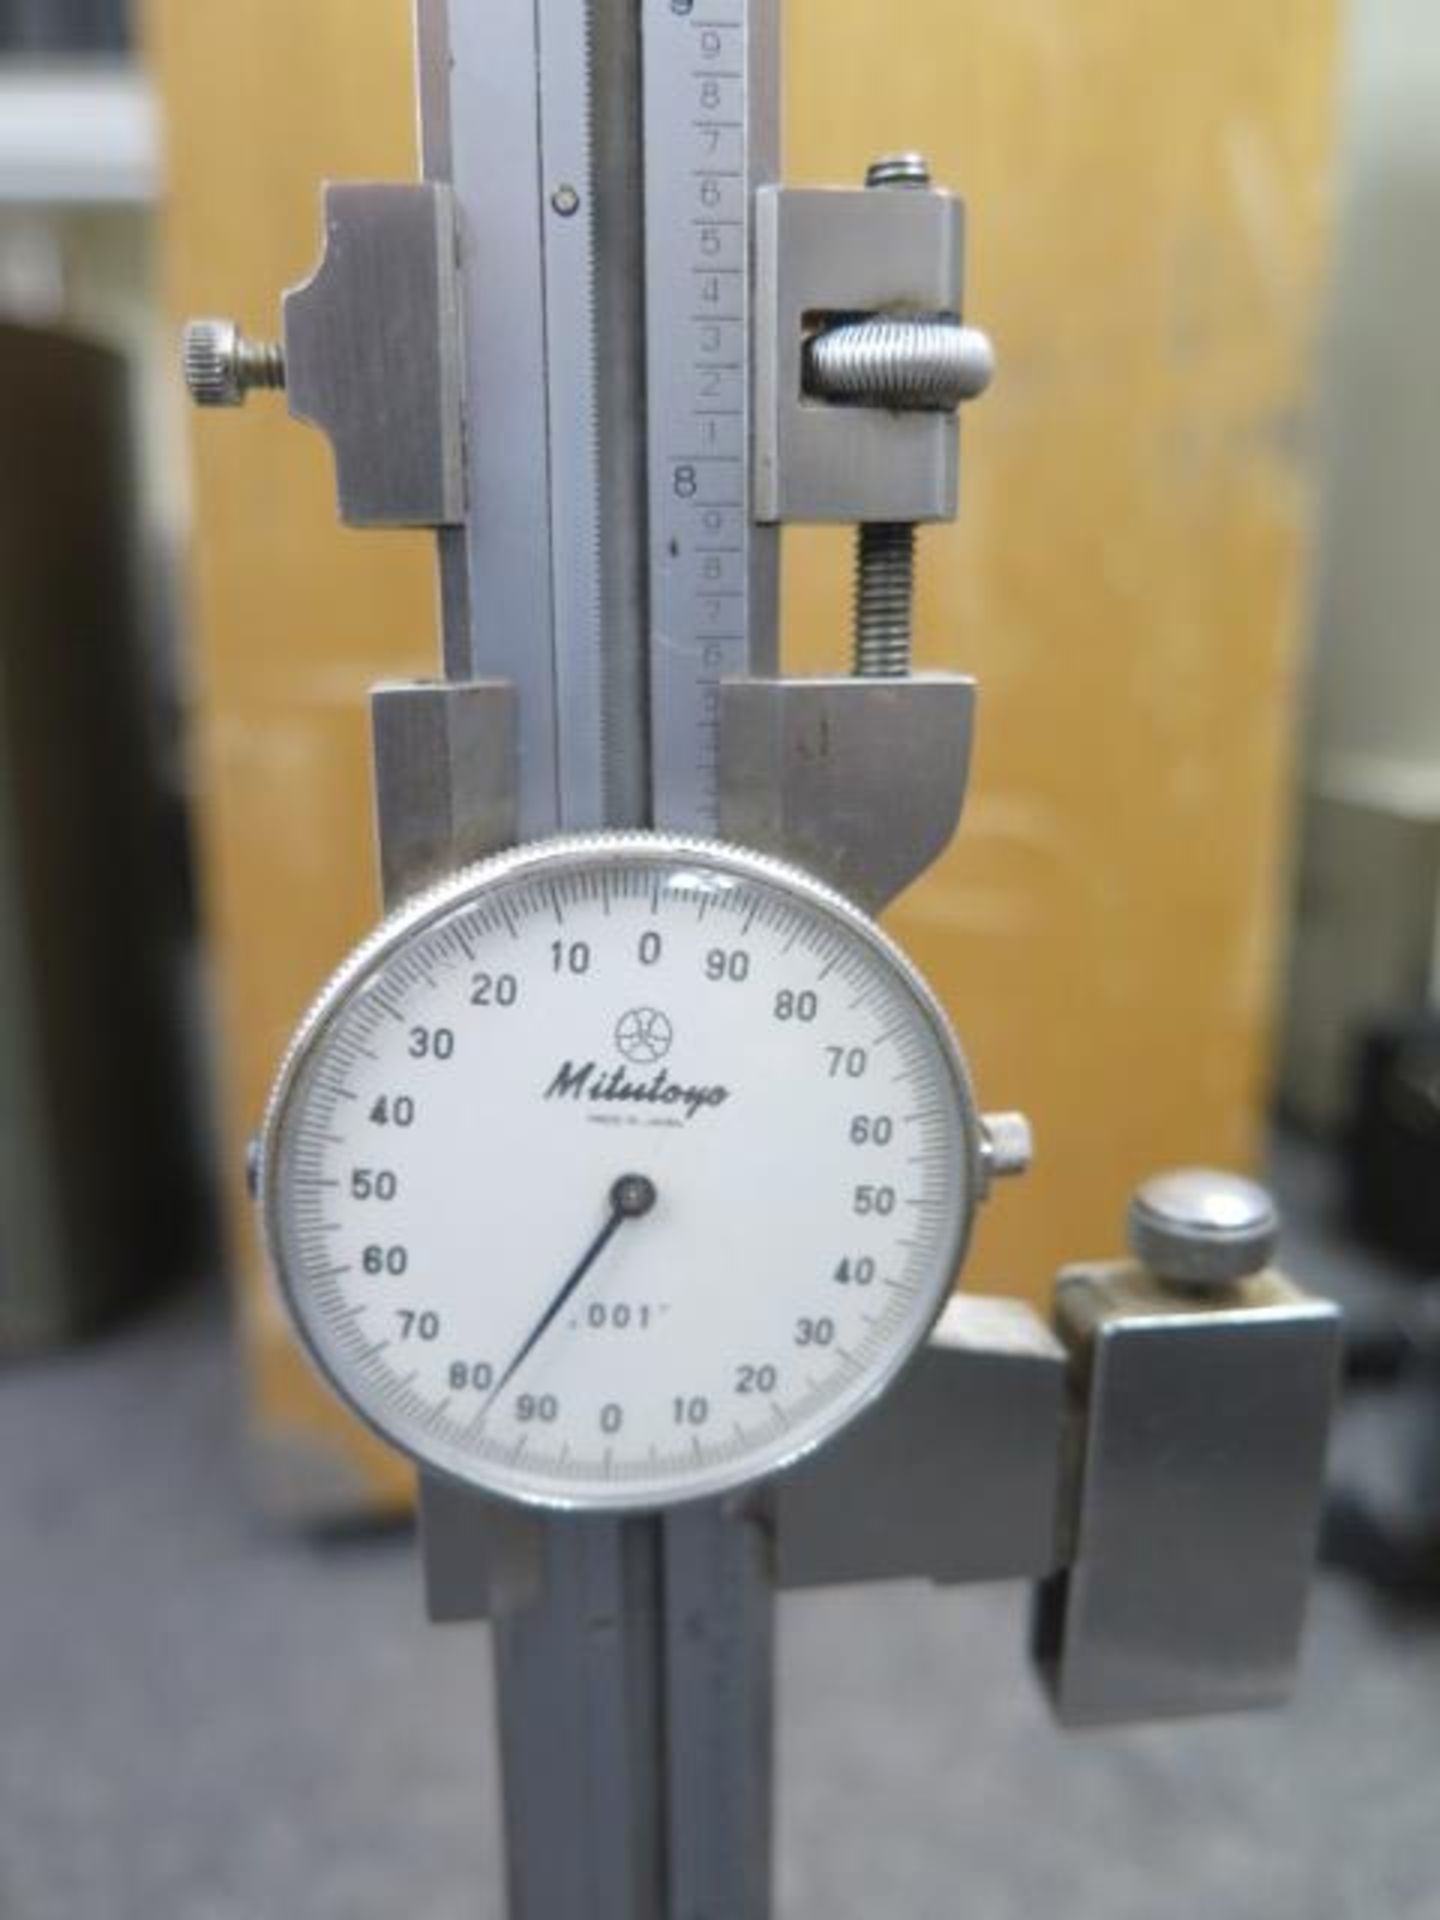 Mitutoyo 12” Dial Height Gage and Mitutoyo 10" Dial Height Gage (SOLD AS-IS - NO WARRANTY) - Image 6 of 6